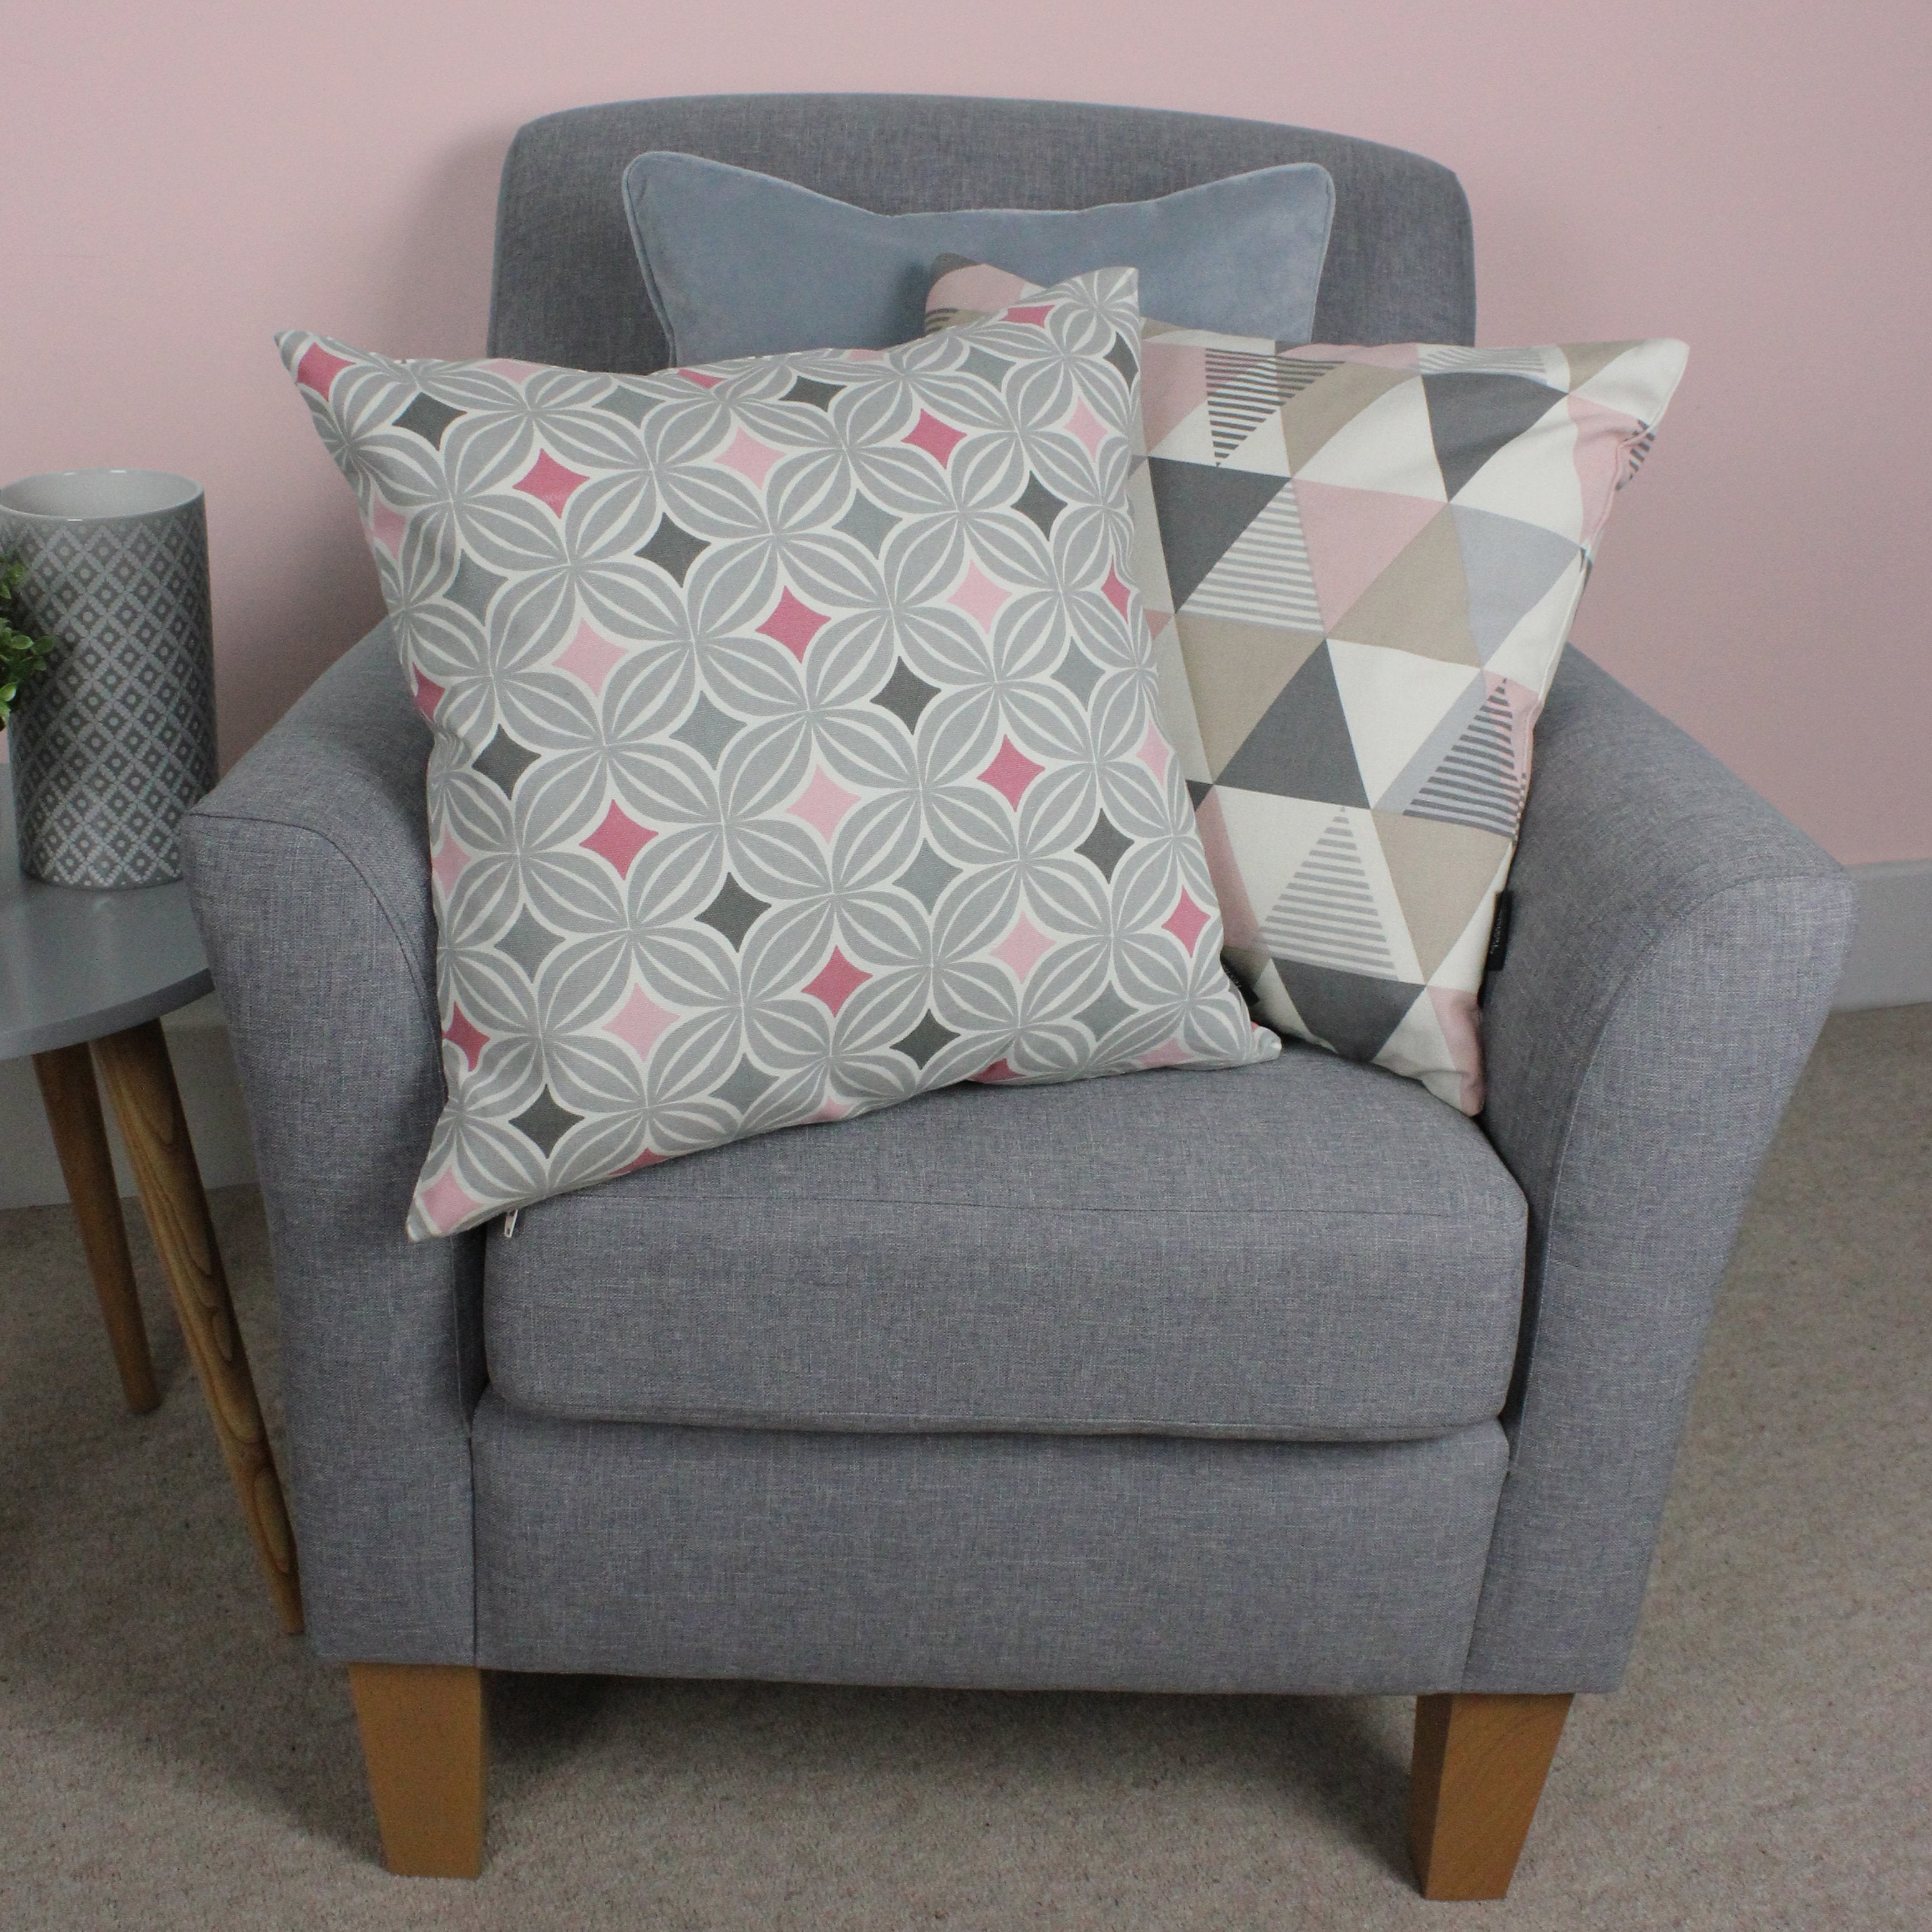 McAlister Textiles Laila Cotton Print Blush Pink Cushion Cushions and Covers 